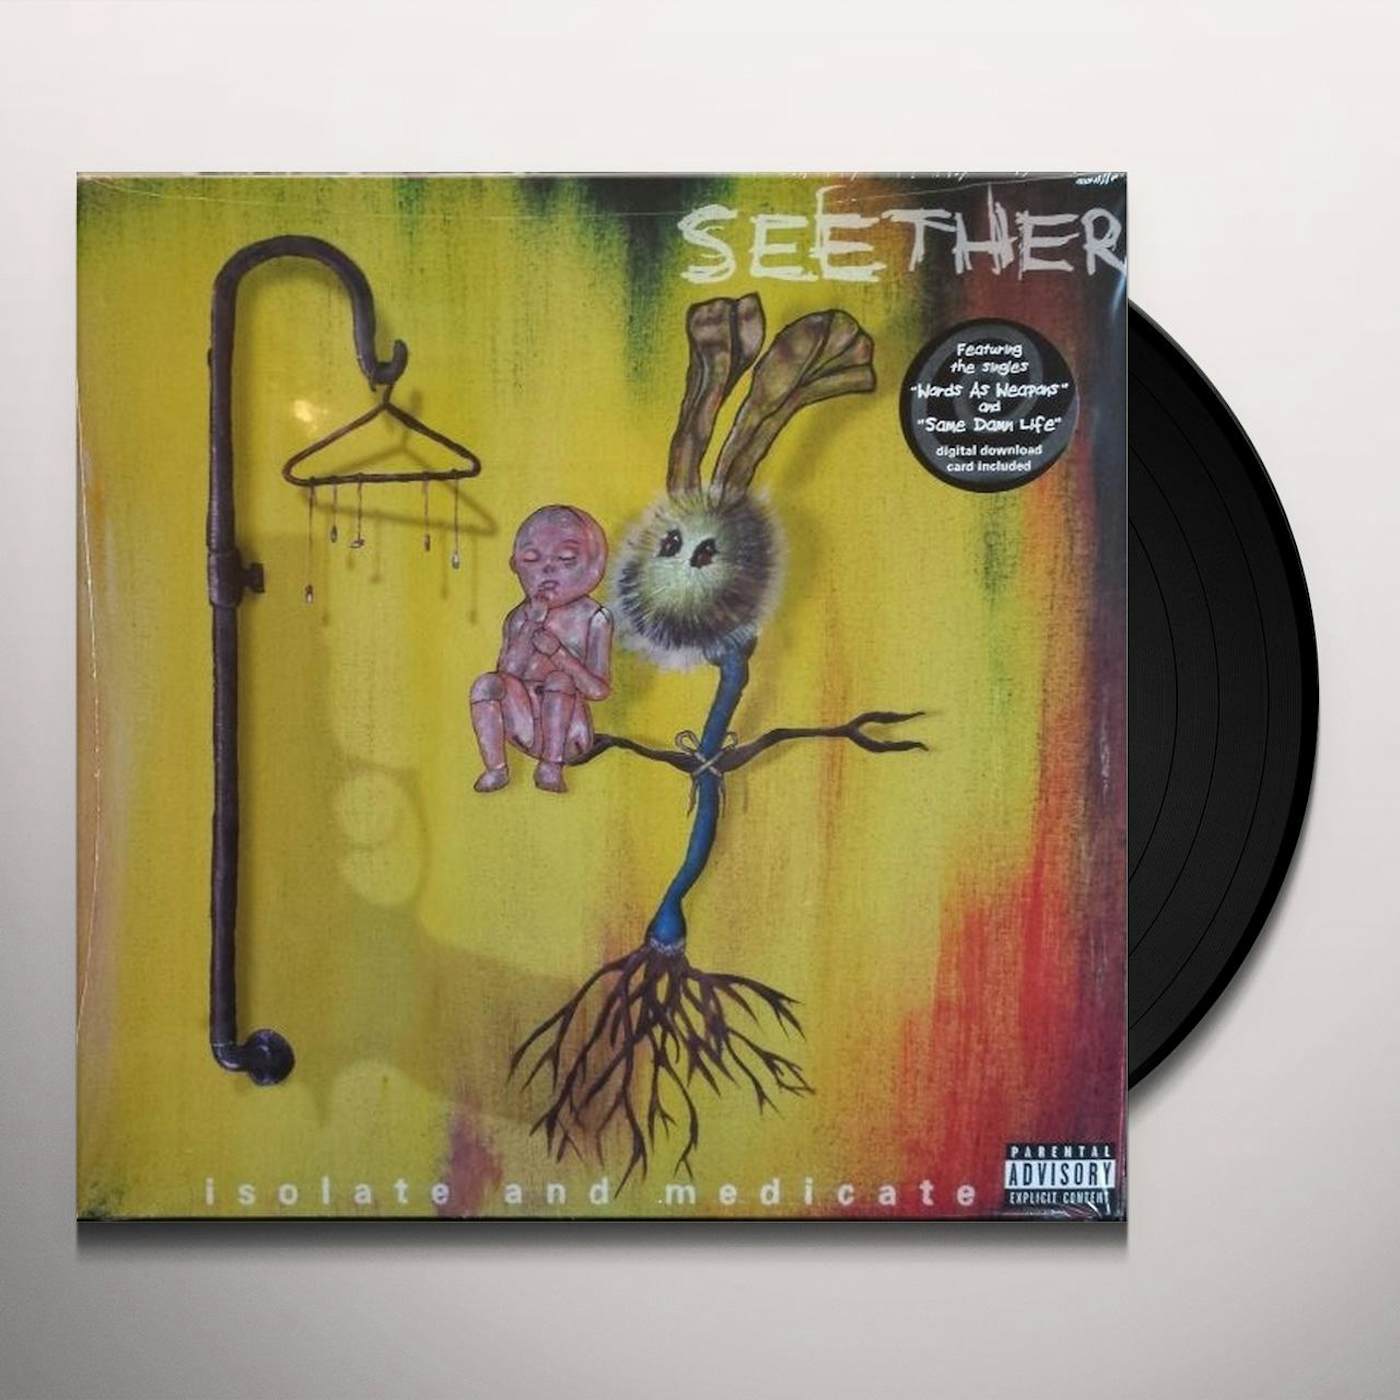 Seether Isolate And Medicate Vinyl Record